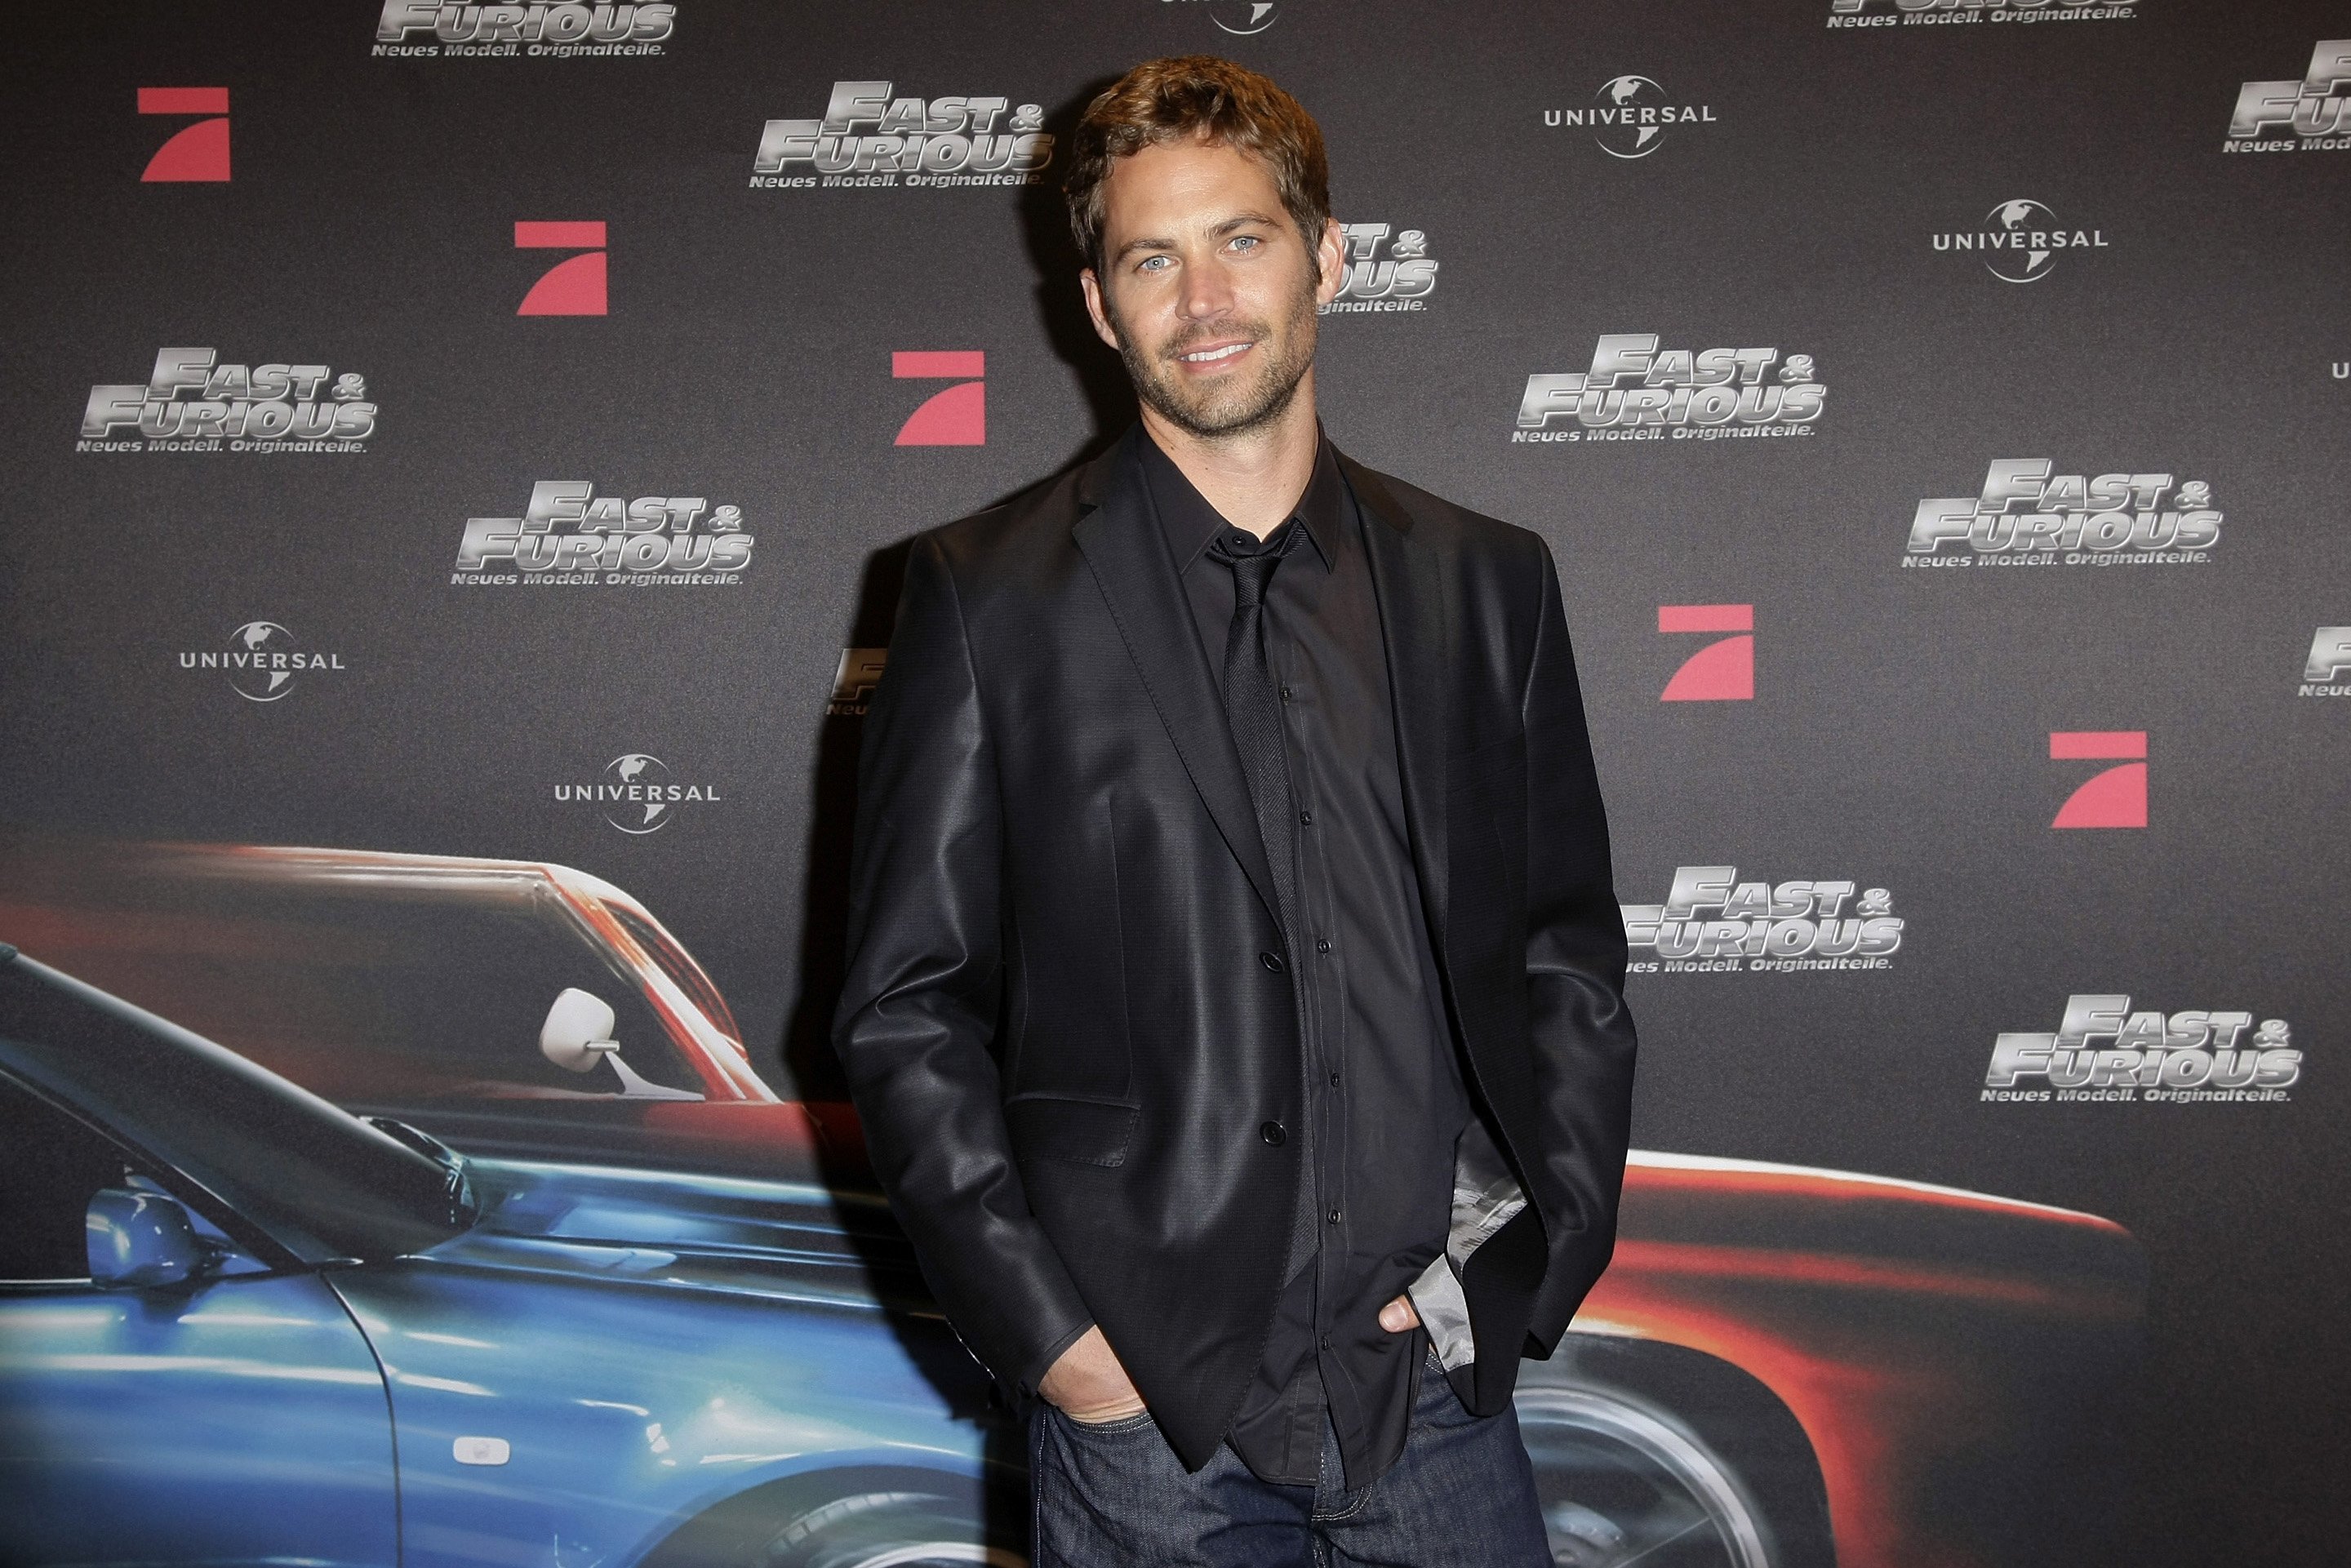 Actor Paul Walker attending the Europe premiere of "The Fast and the Furious 4" at UCI cinema world at Ruhrpark on March 17, 2009 in Bochum, Germany. | Source: Getty Images